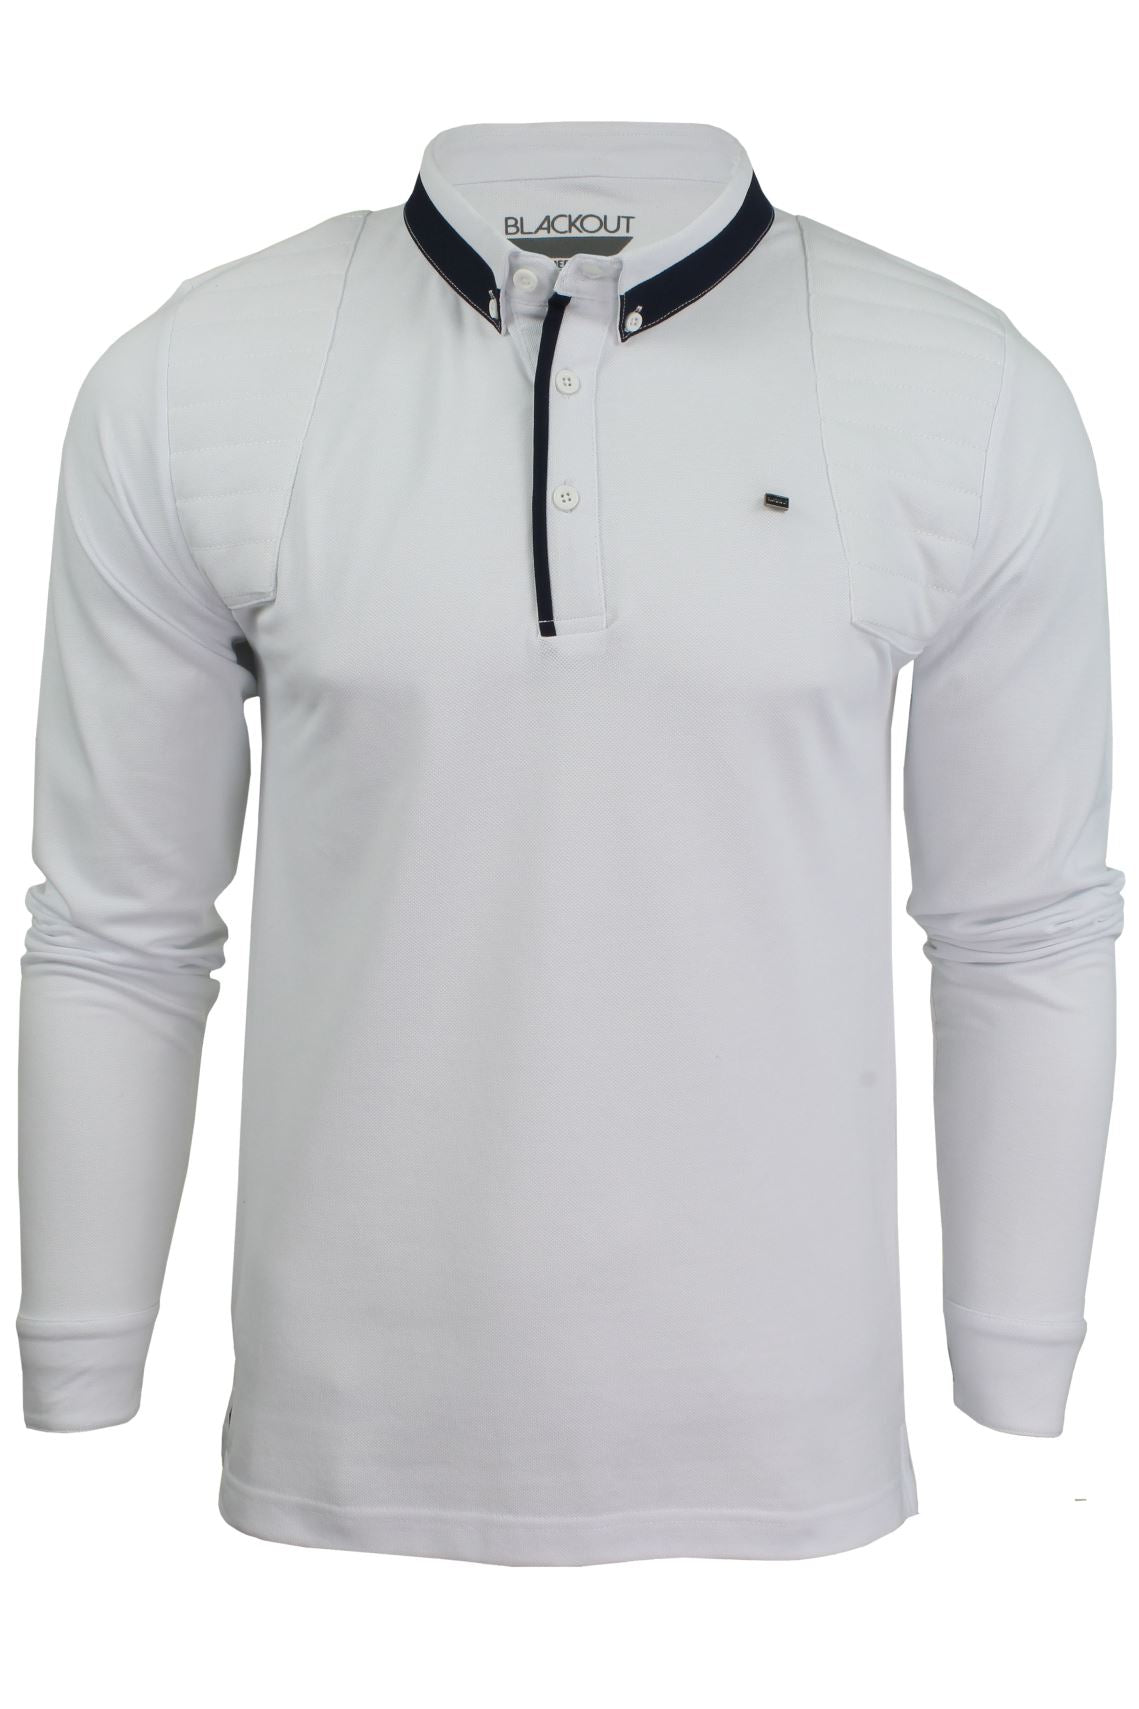 Mens Short Sleeved Polo Shirt from the Blackout Collection by Voi Jeans, 01, Dubb, Cole - White